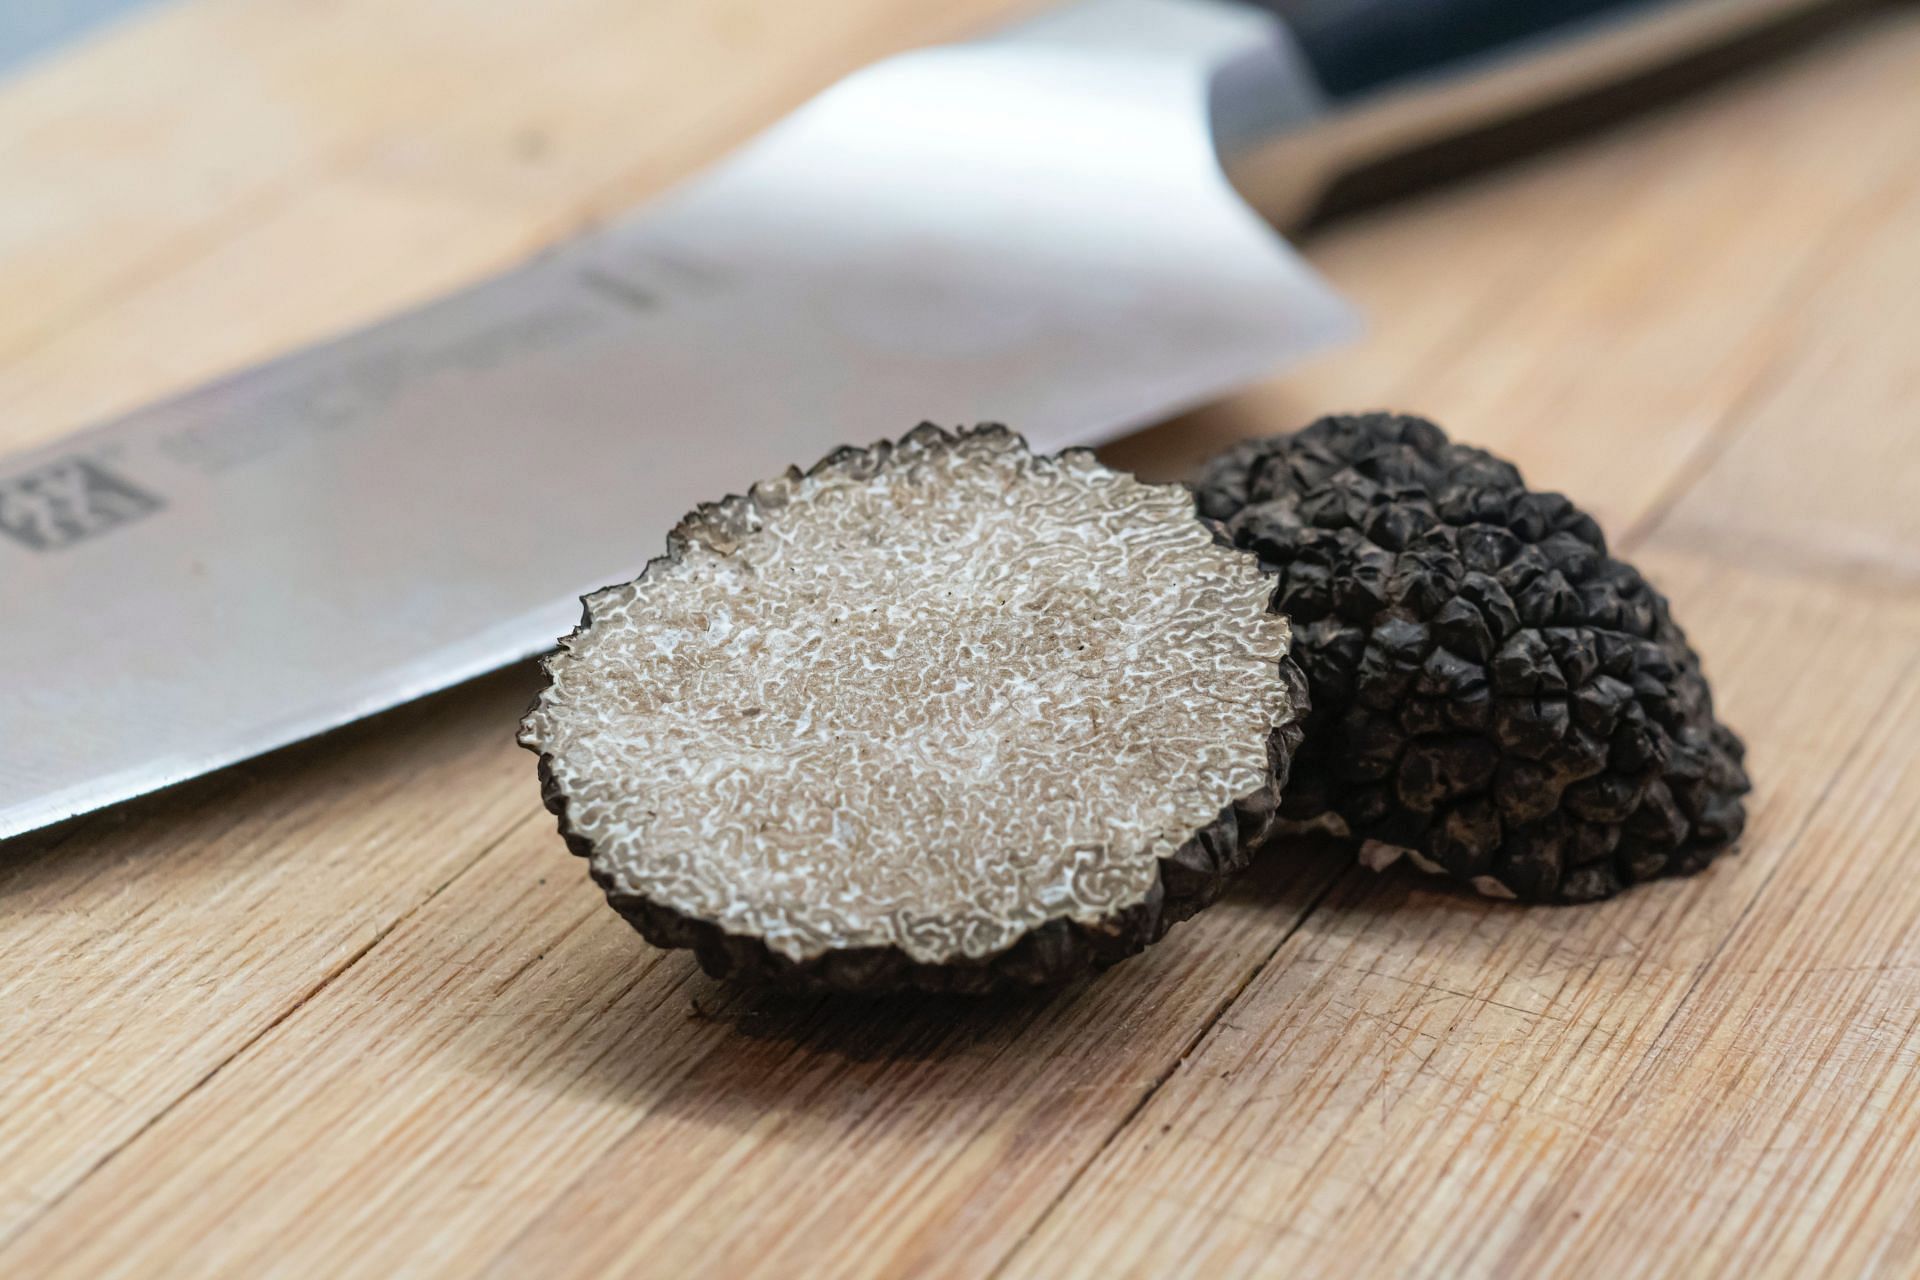 Truffle in Faked foods in the world (Image via Unsplash/Amirali)